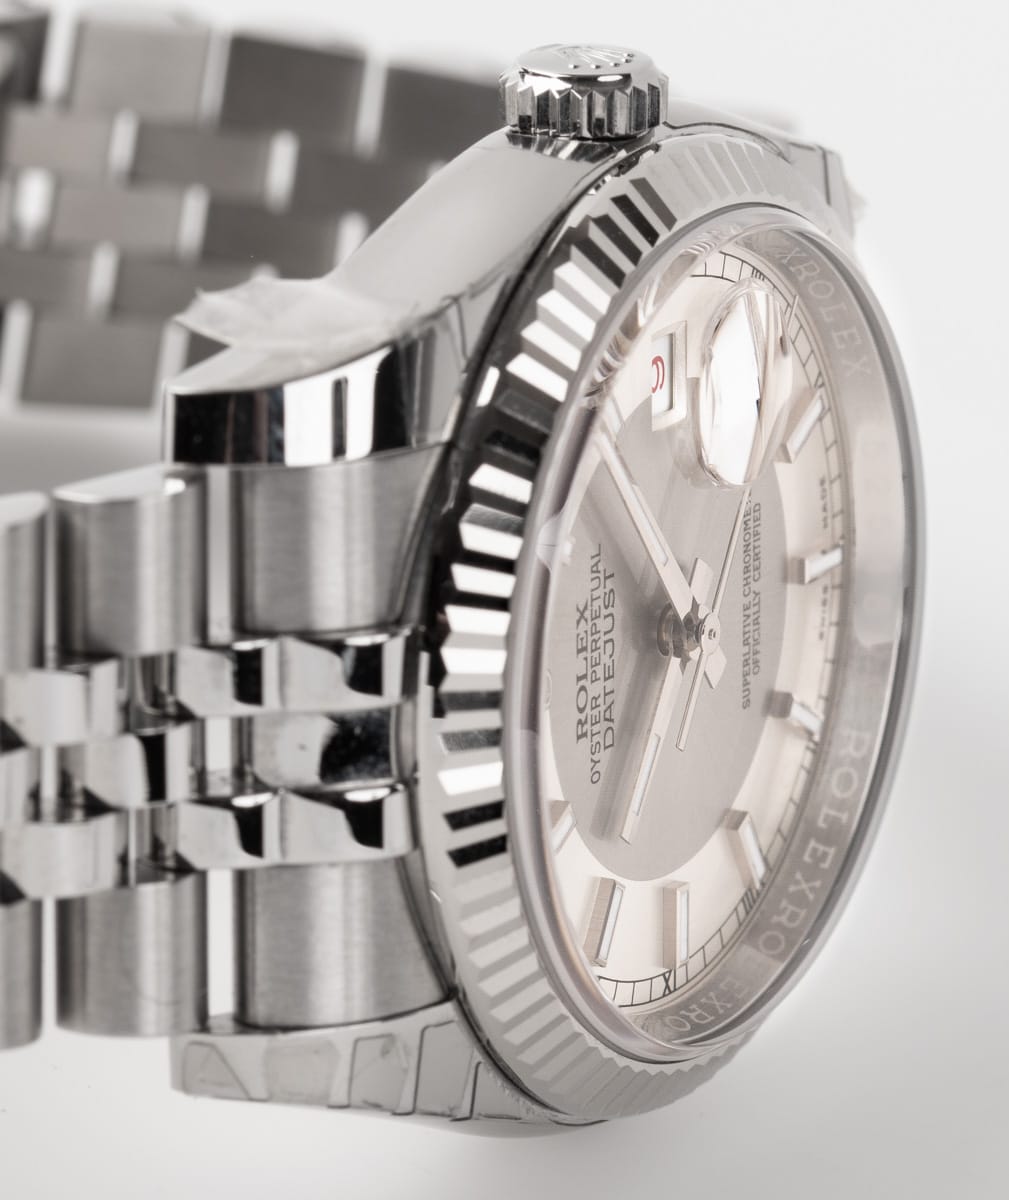 Dial Shot of Datejust